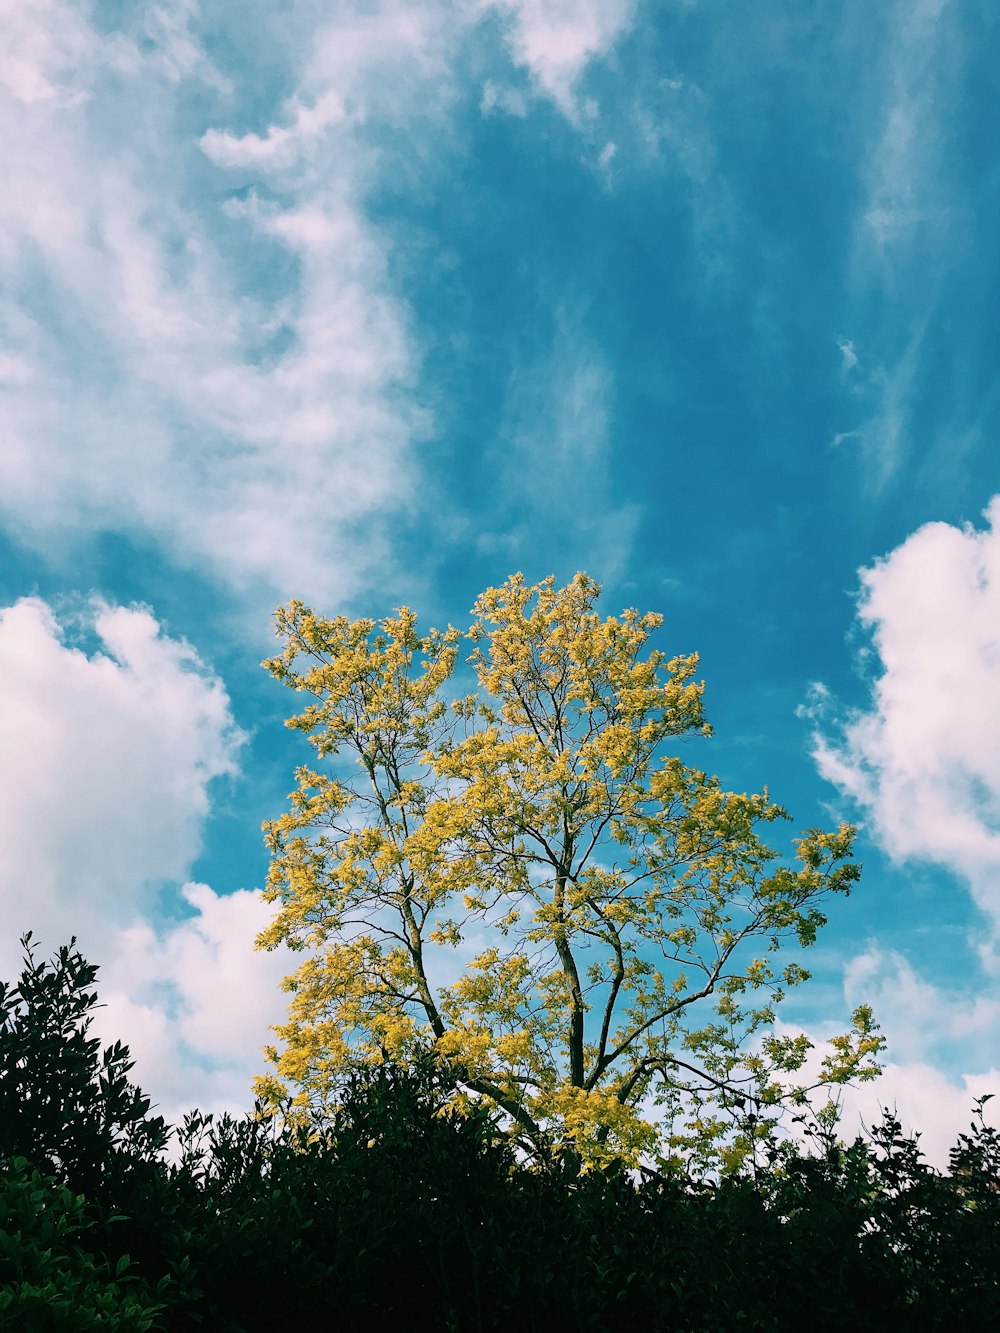 a tree with yellow flowers in the foreground and a blue sky with clouds in